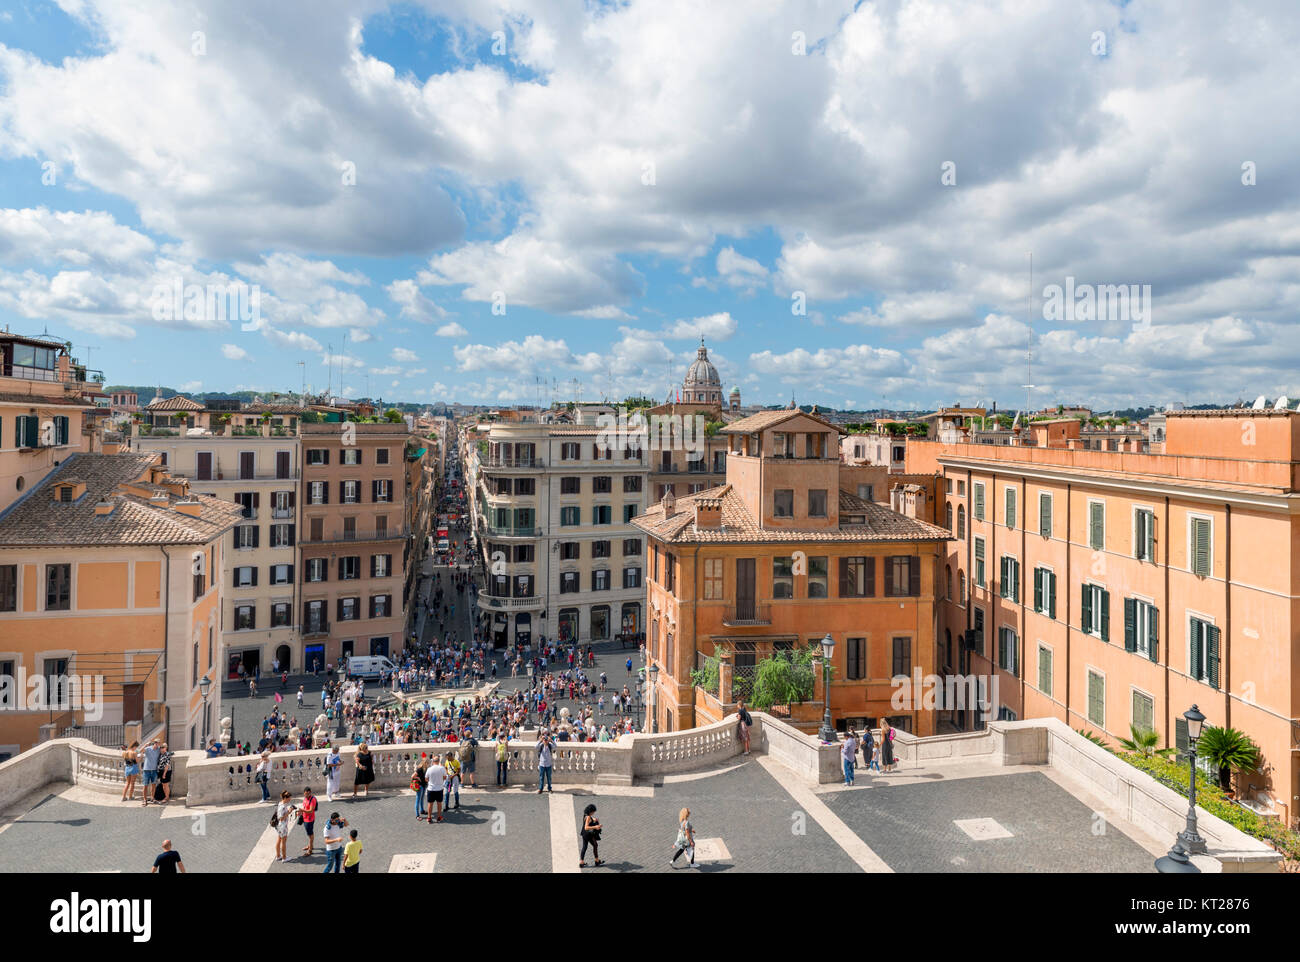 View from the top of the Spanish Steps looking out over the Piazza di Spagna and Via dei Condotti, Rome, Italy Stock Photo